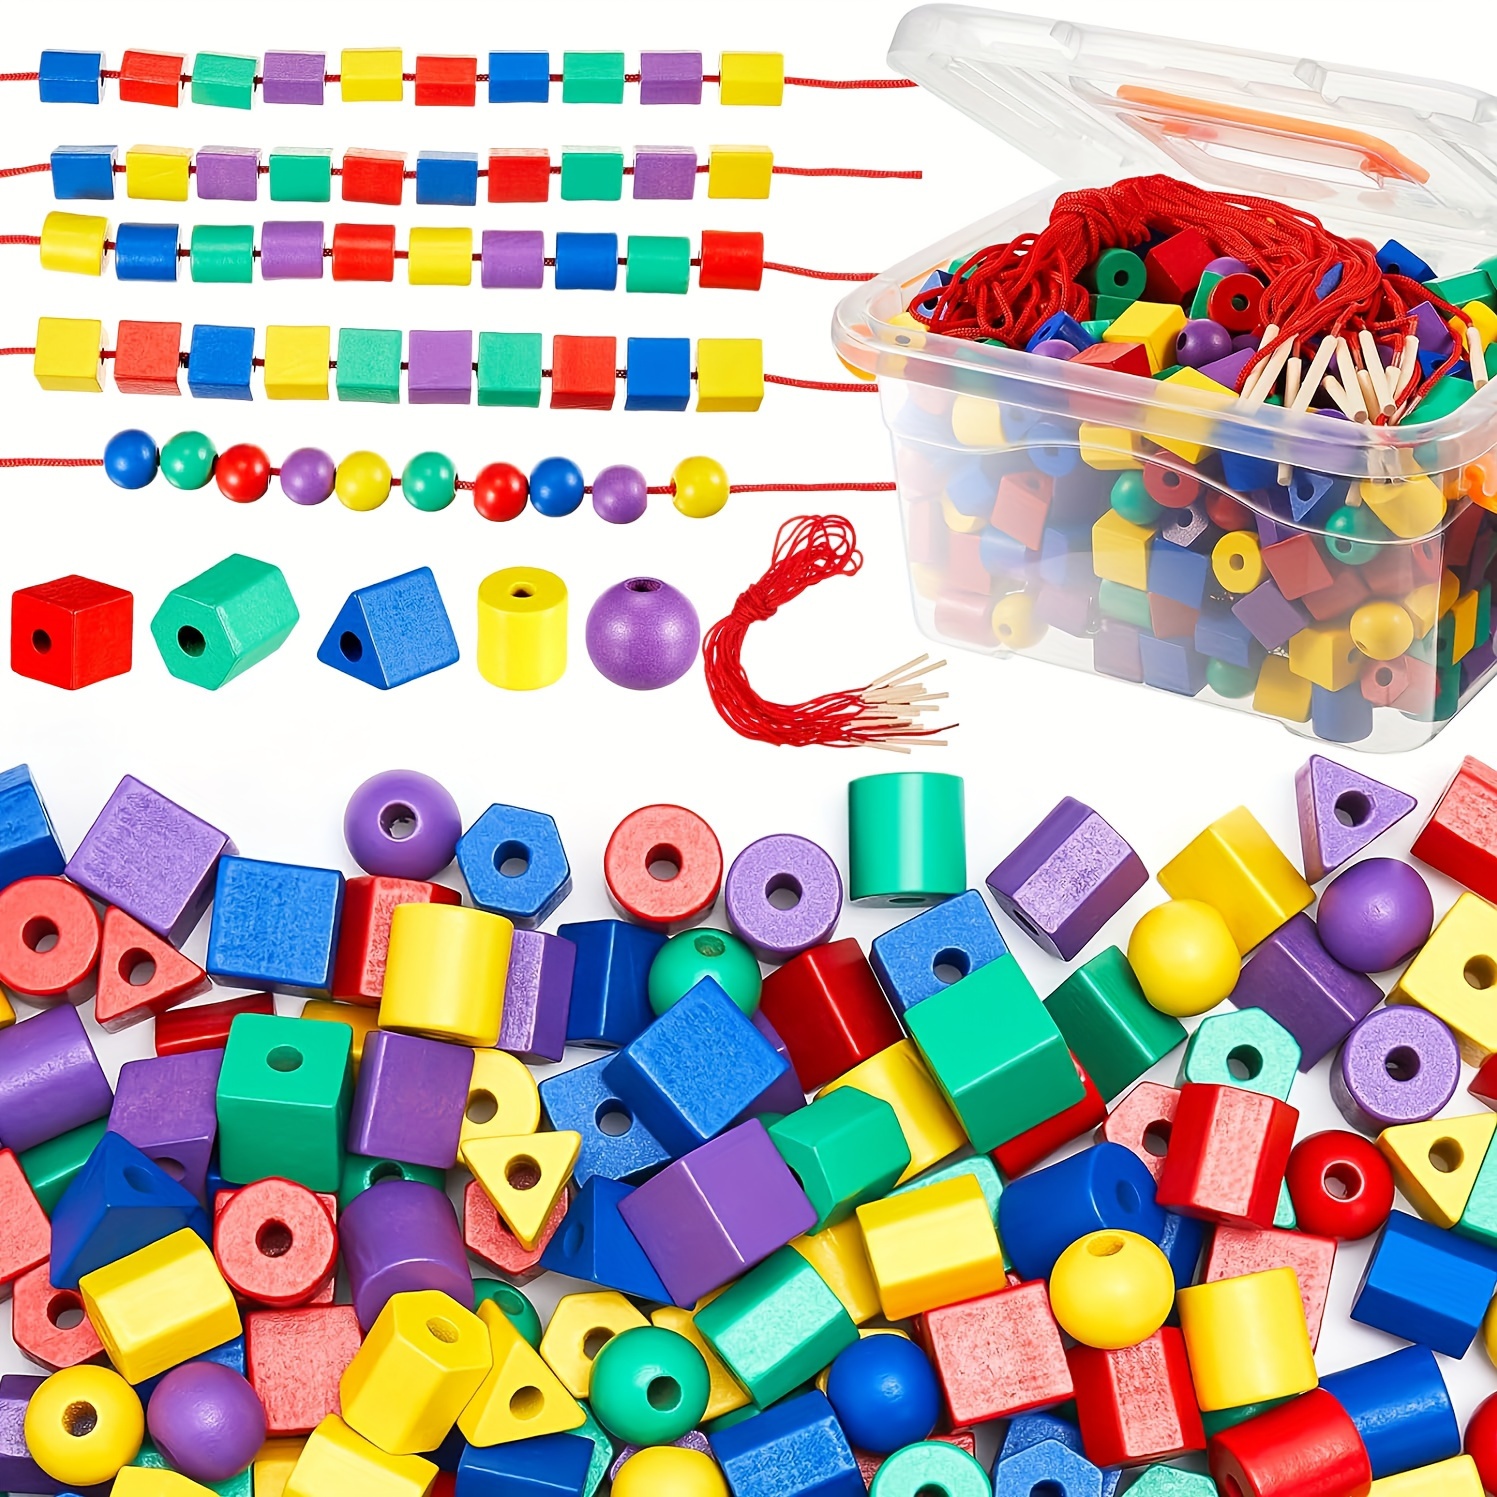 

80-piece Colorful Lacing Beads Collection - Montessori Activity & Color Sorting With Strings & Storage Bag - Perfect For Early Learning & Development Support